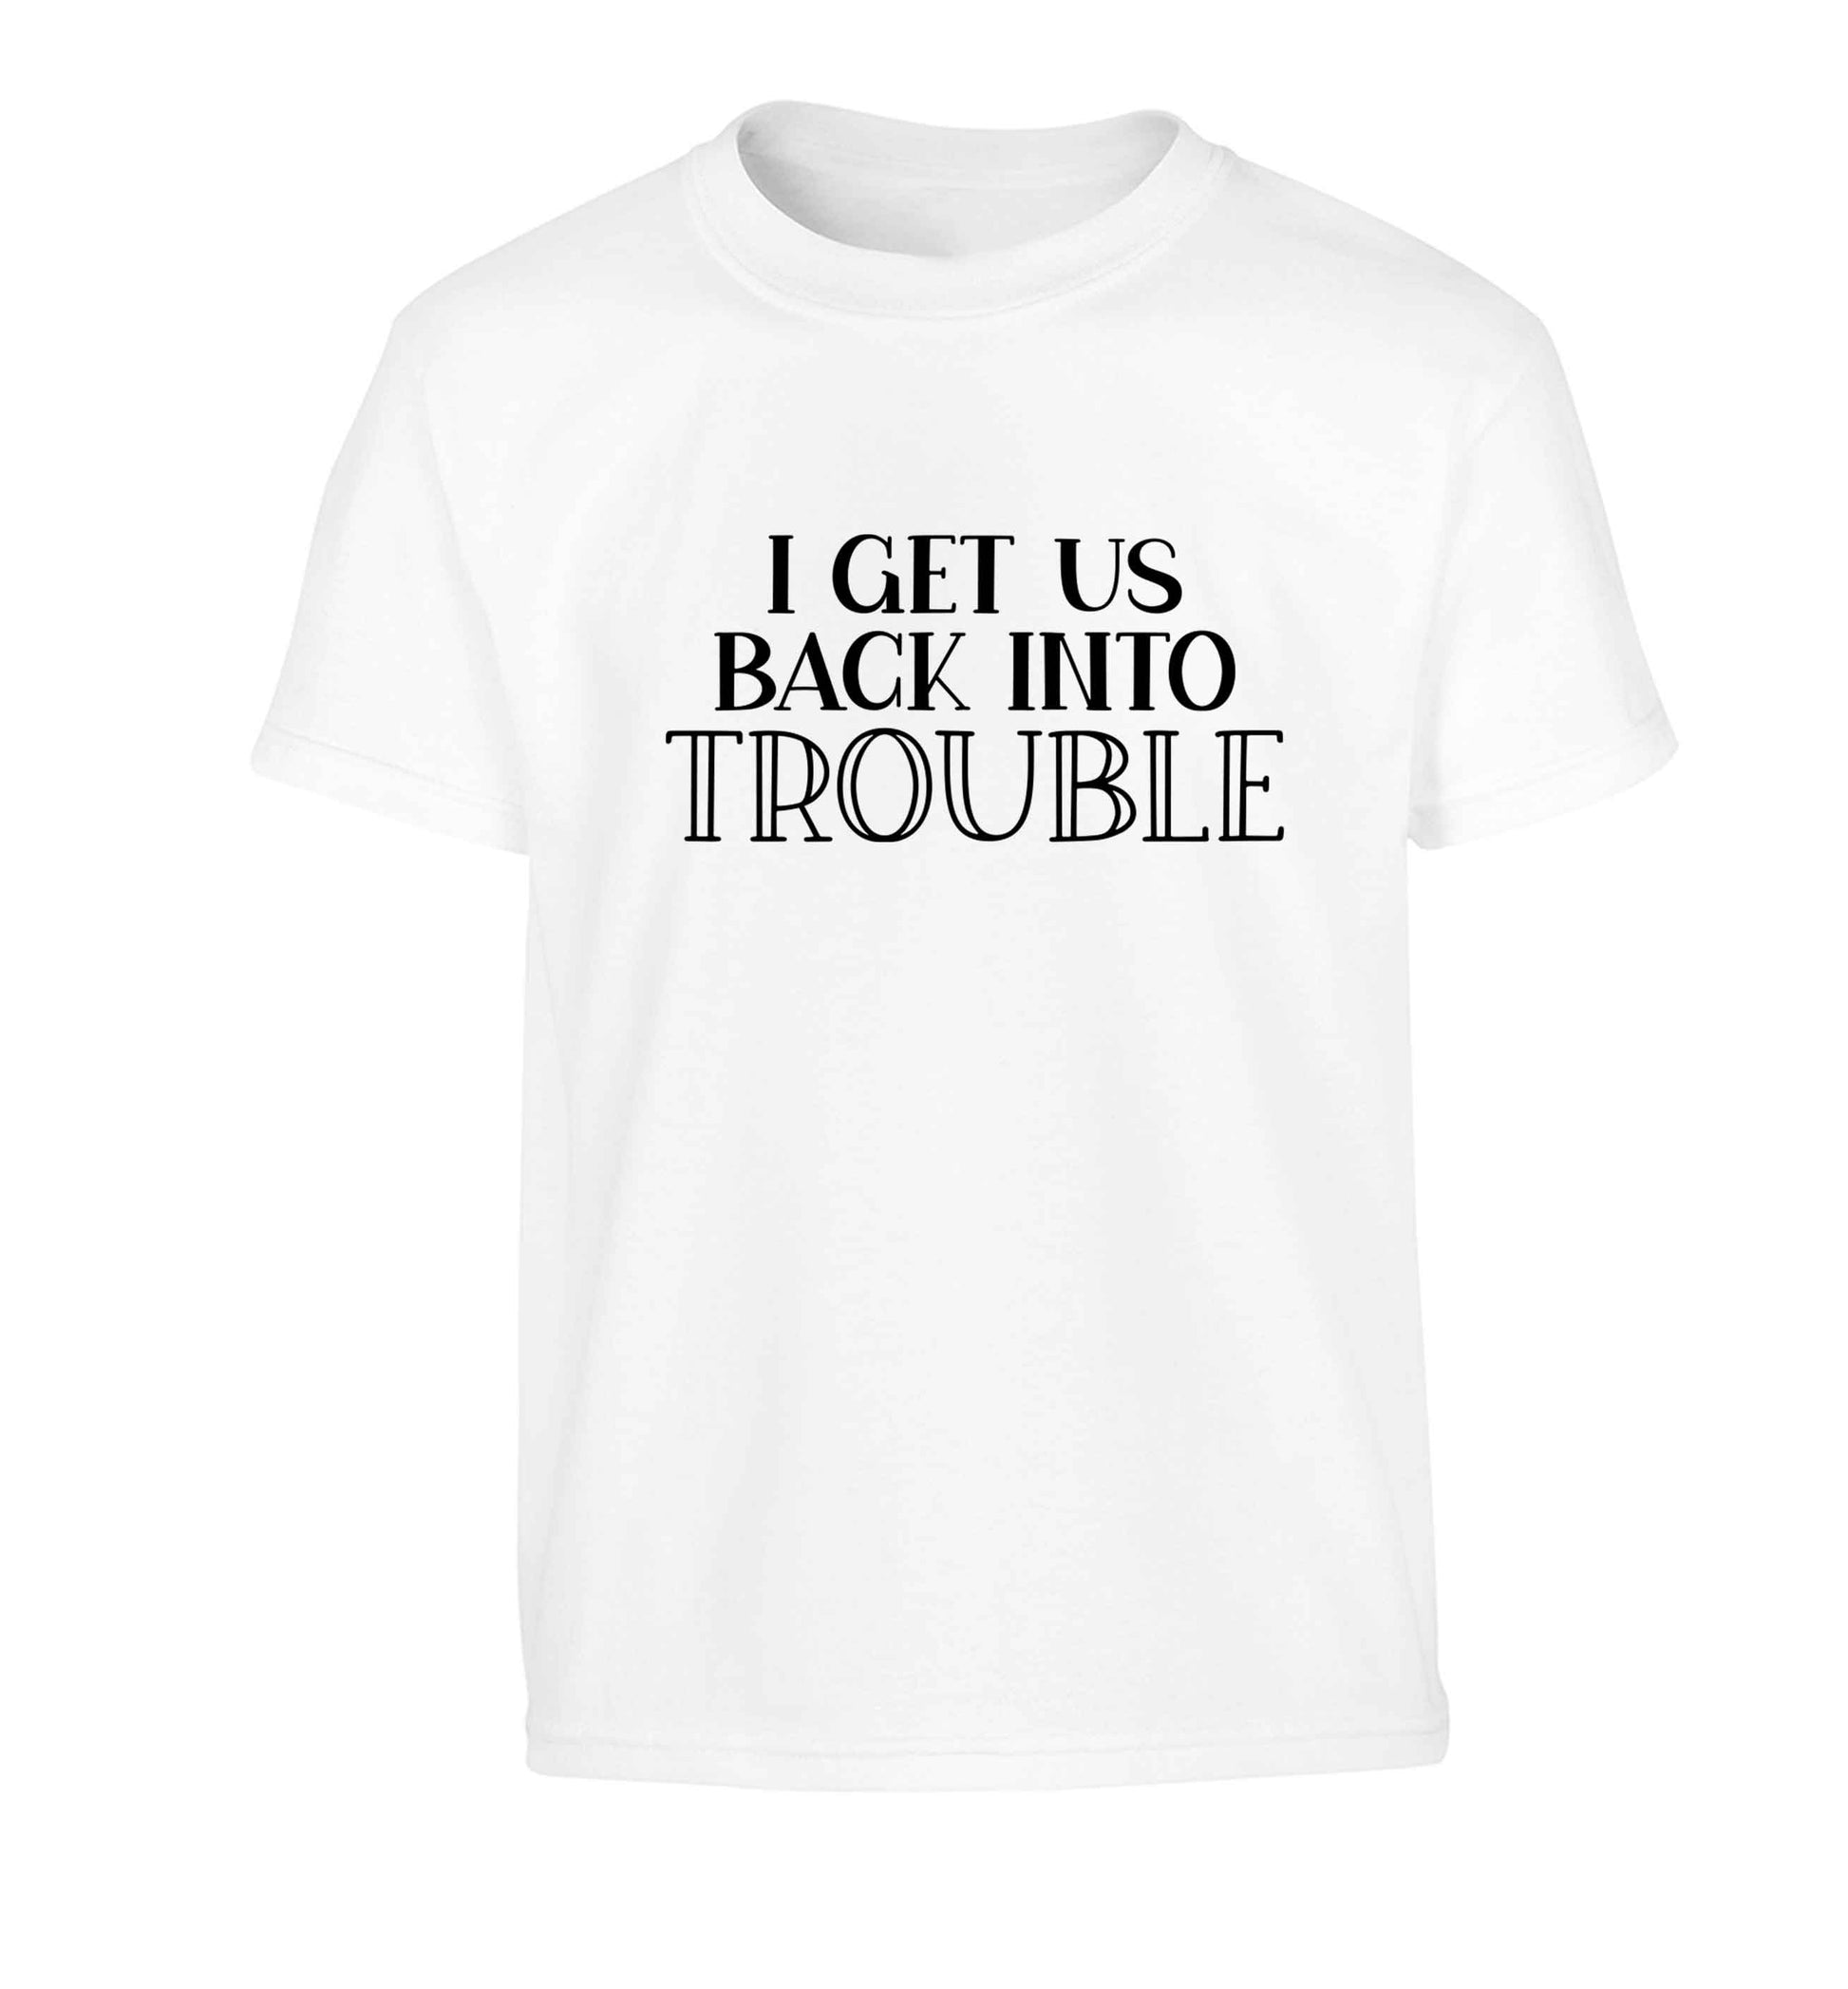 I get us back into trouble Children's white Tshirt 12-13 Years